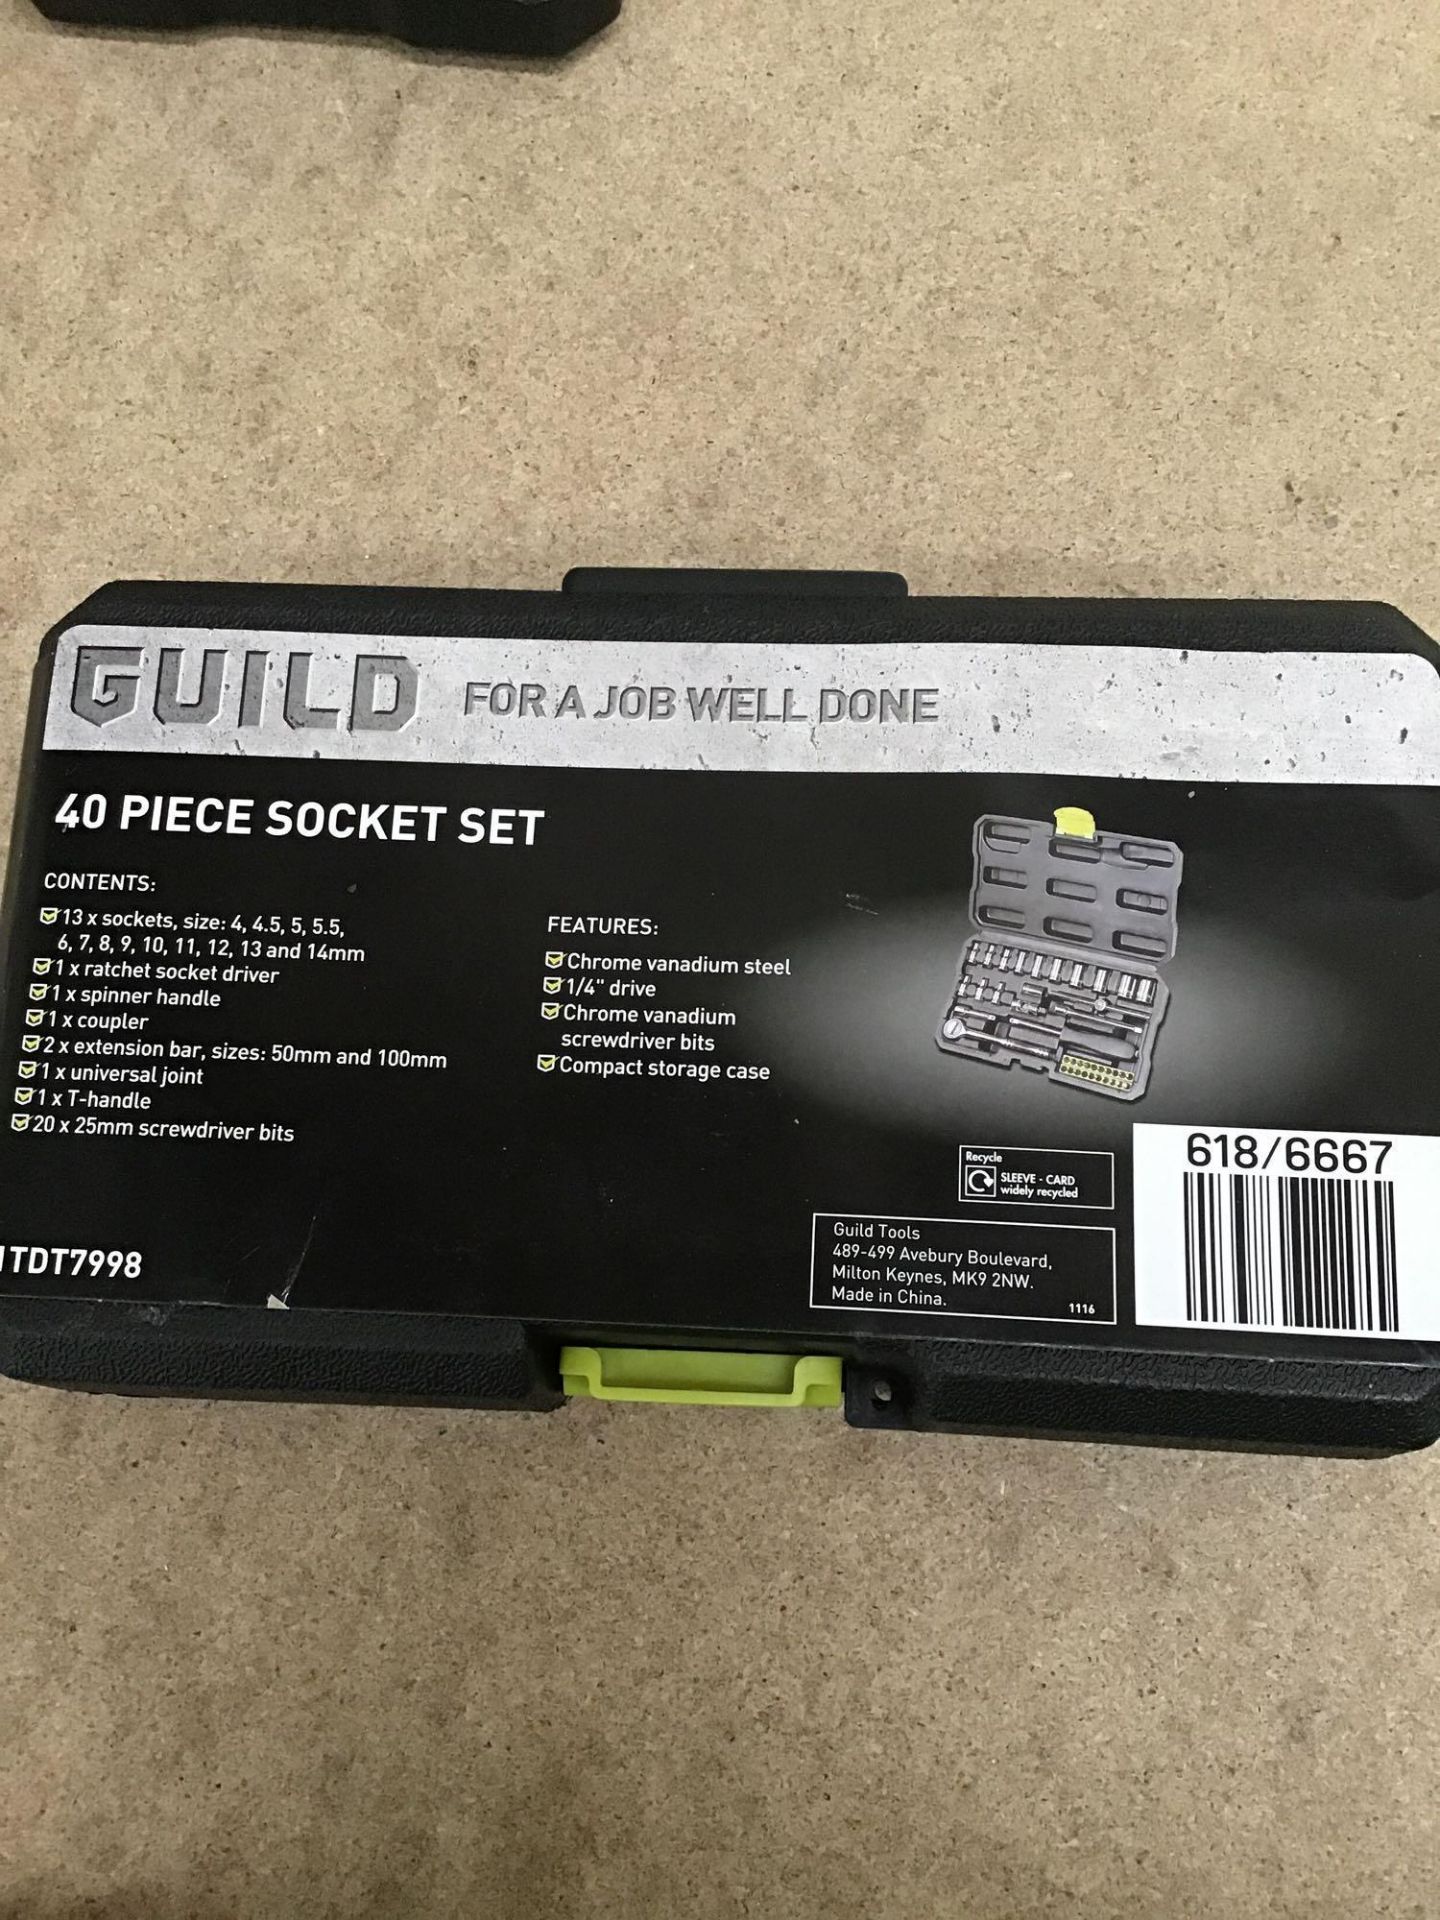 Guild 40 Piece 1/4 Inch Drive Socket Set 618/6667 £25.00 RRP - Image 4 of 5